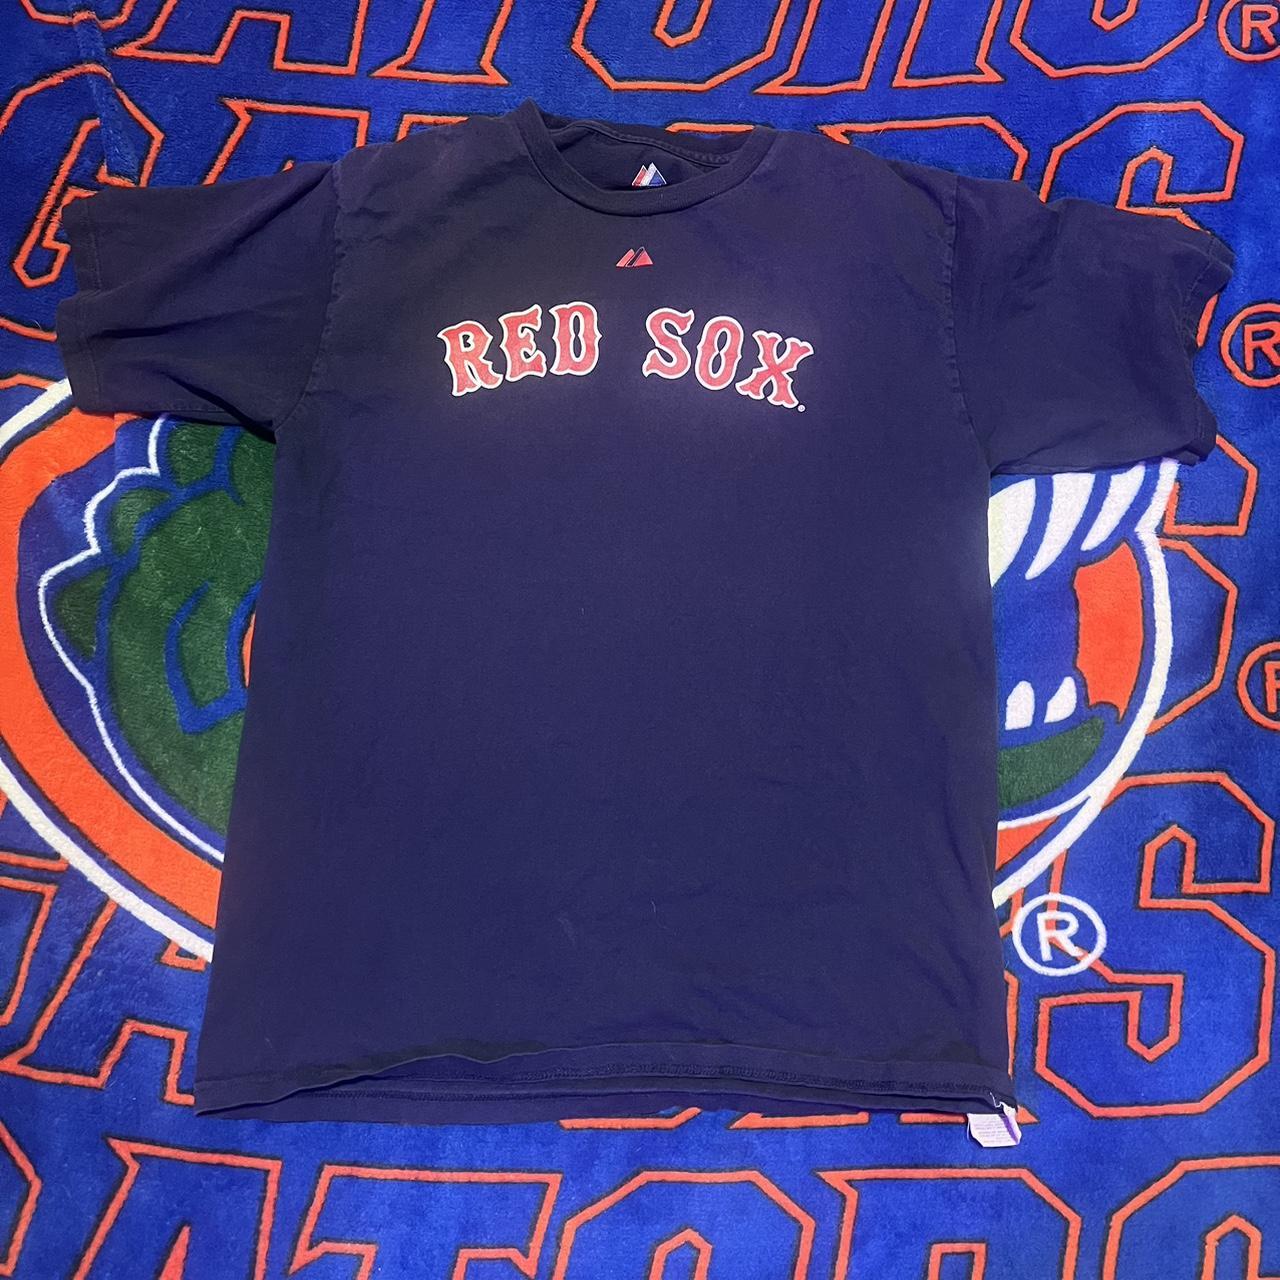 vintage red sox dustin pedroia shirt, tagged youth - Depop